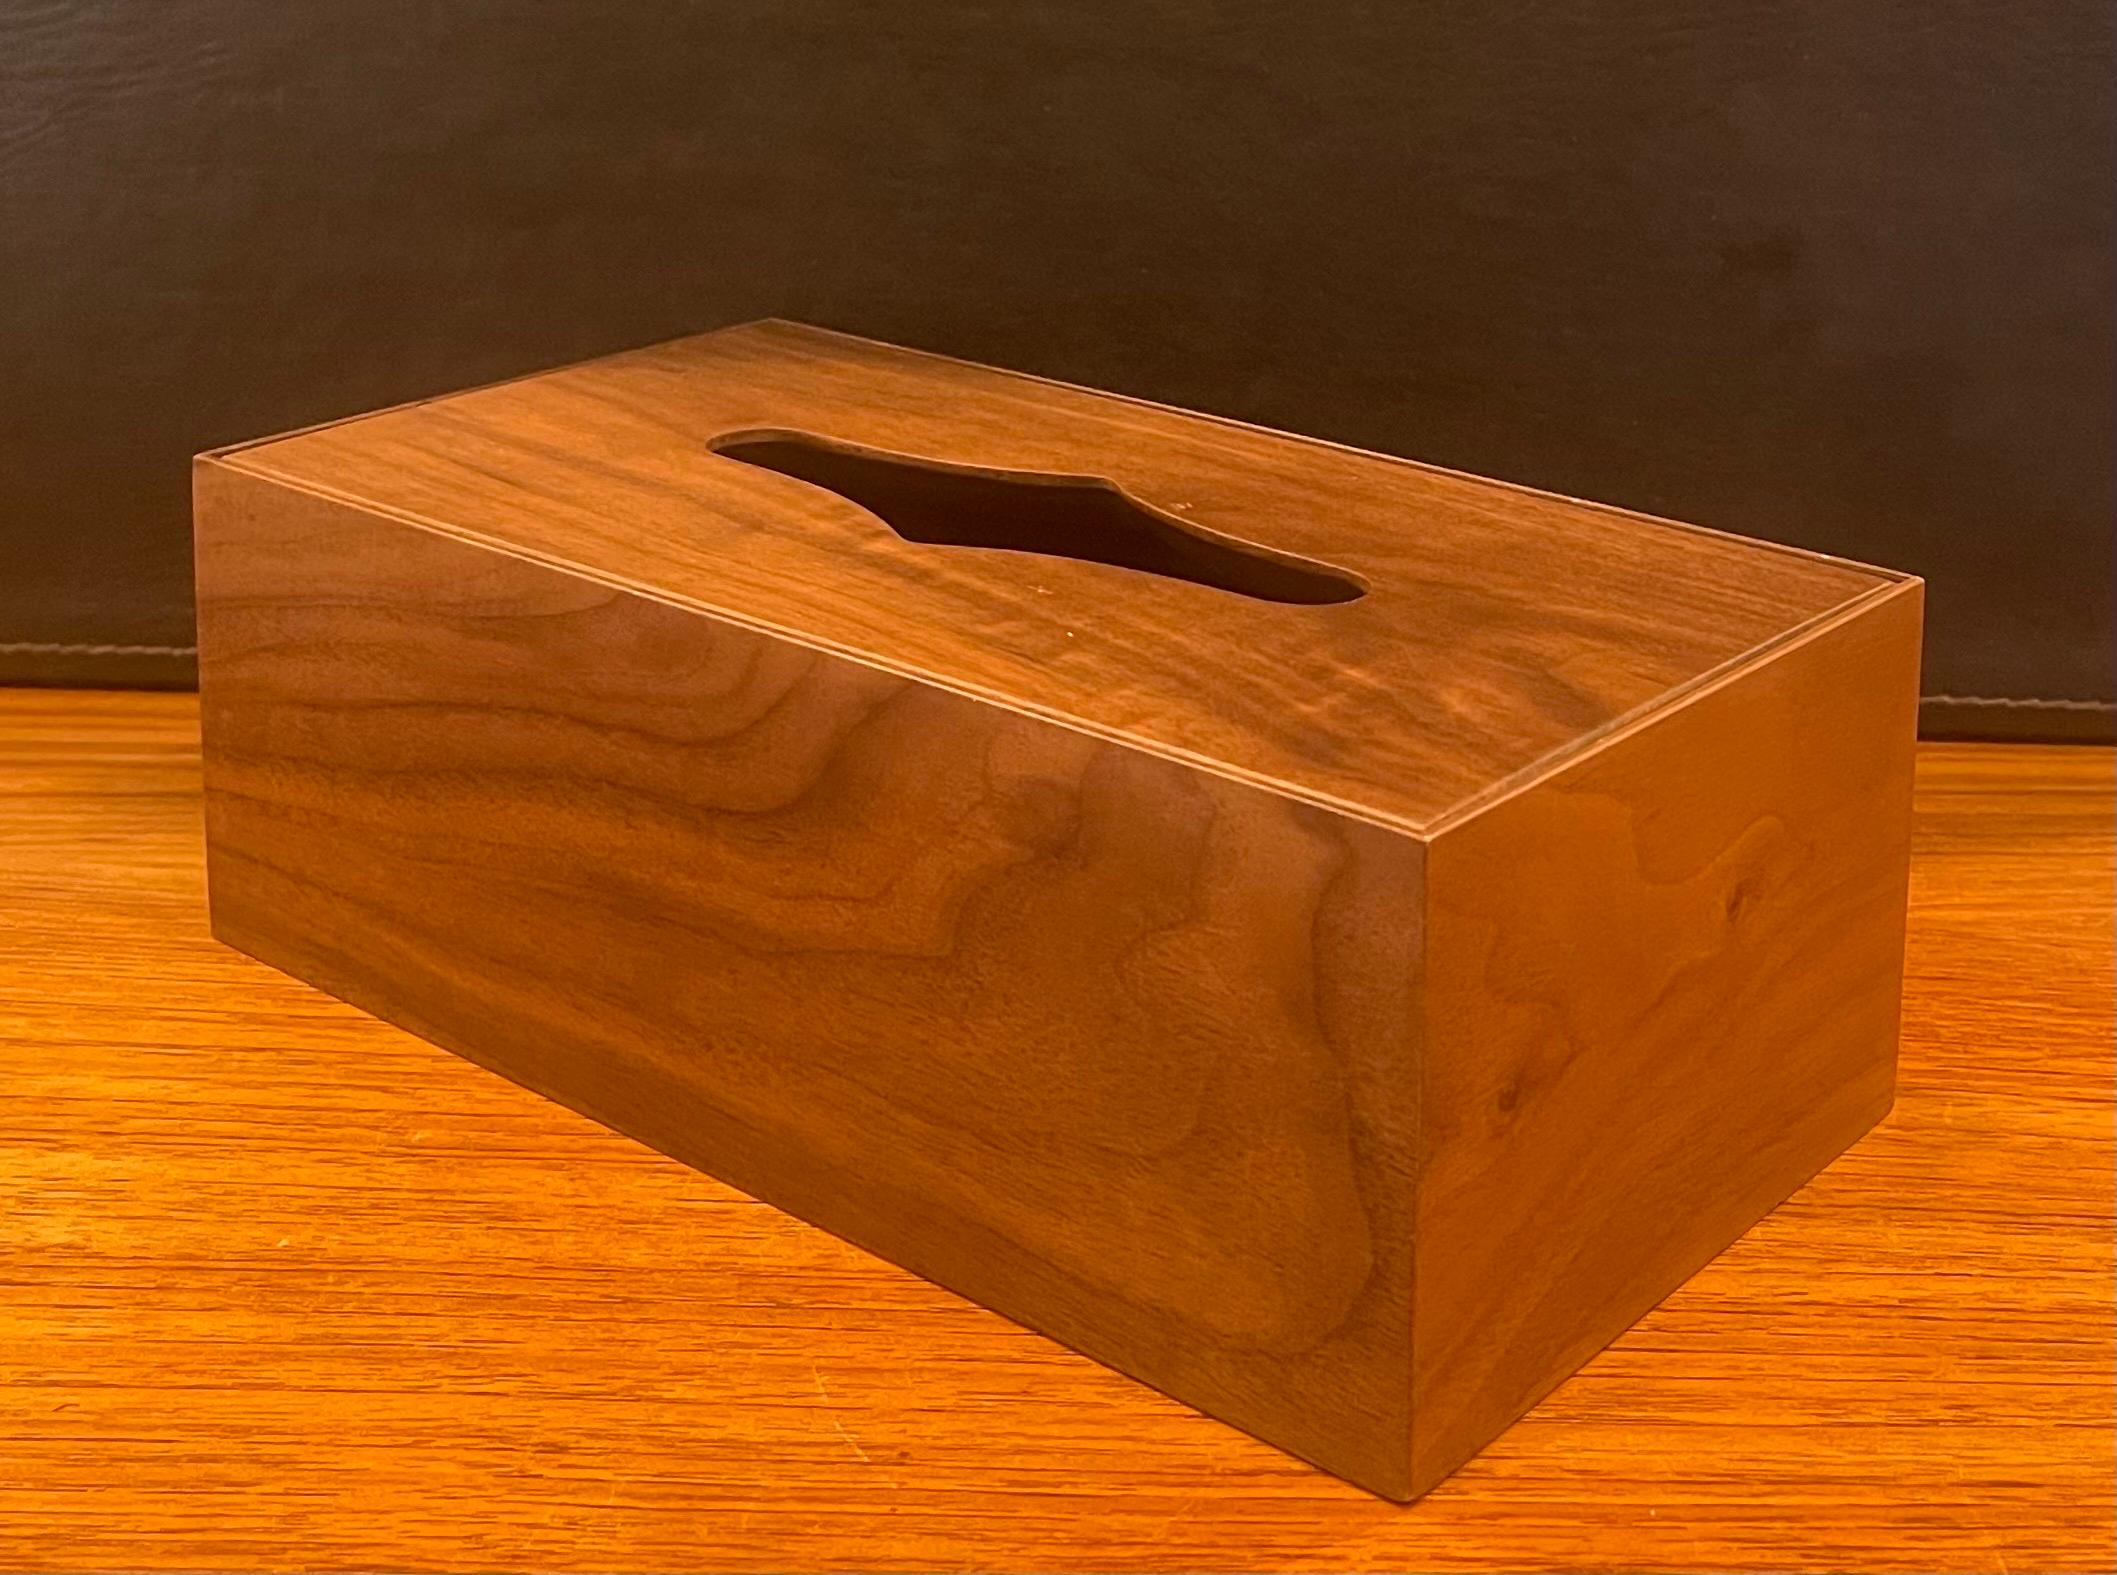 A very nice MCM walnut tissue box cover, circa 1980s. The box is in very good vintage condition and measures: 10.25